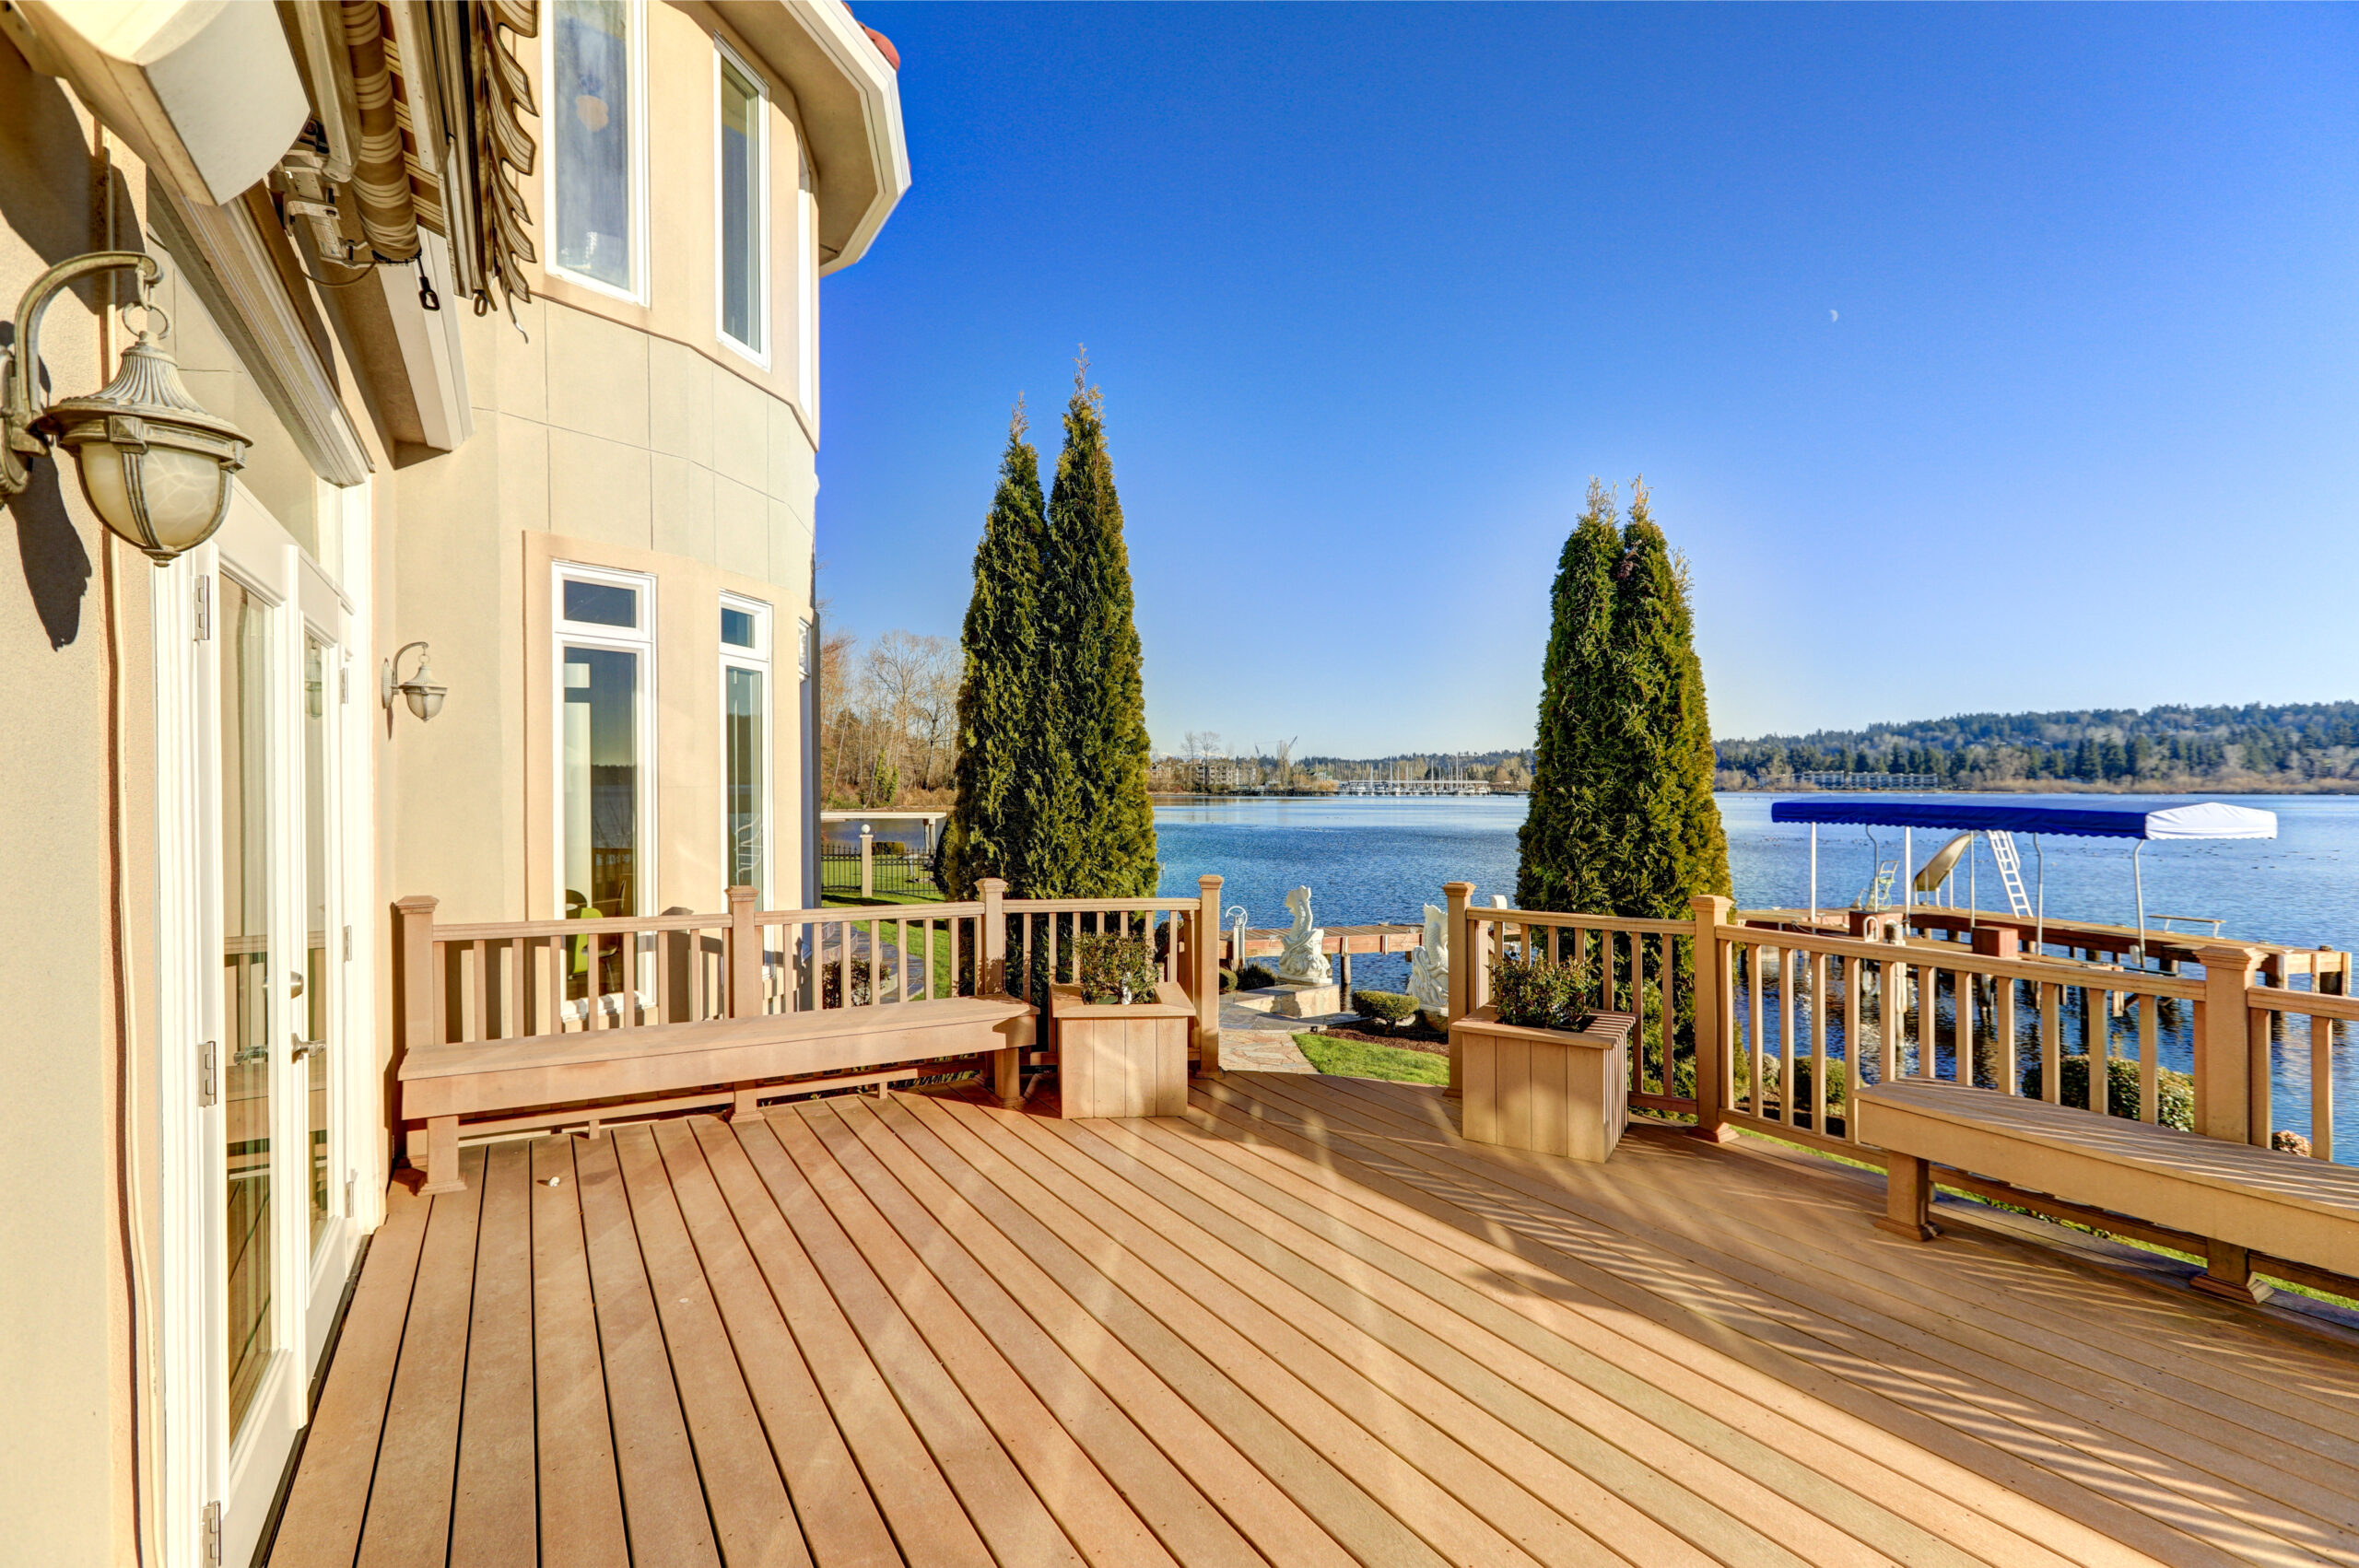 lakeside view from a deck with cypress trees